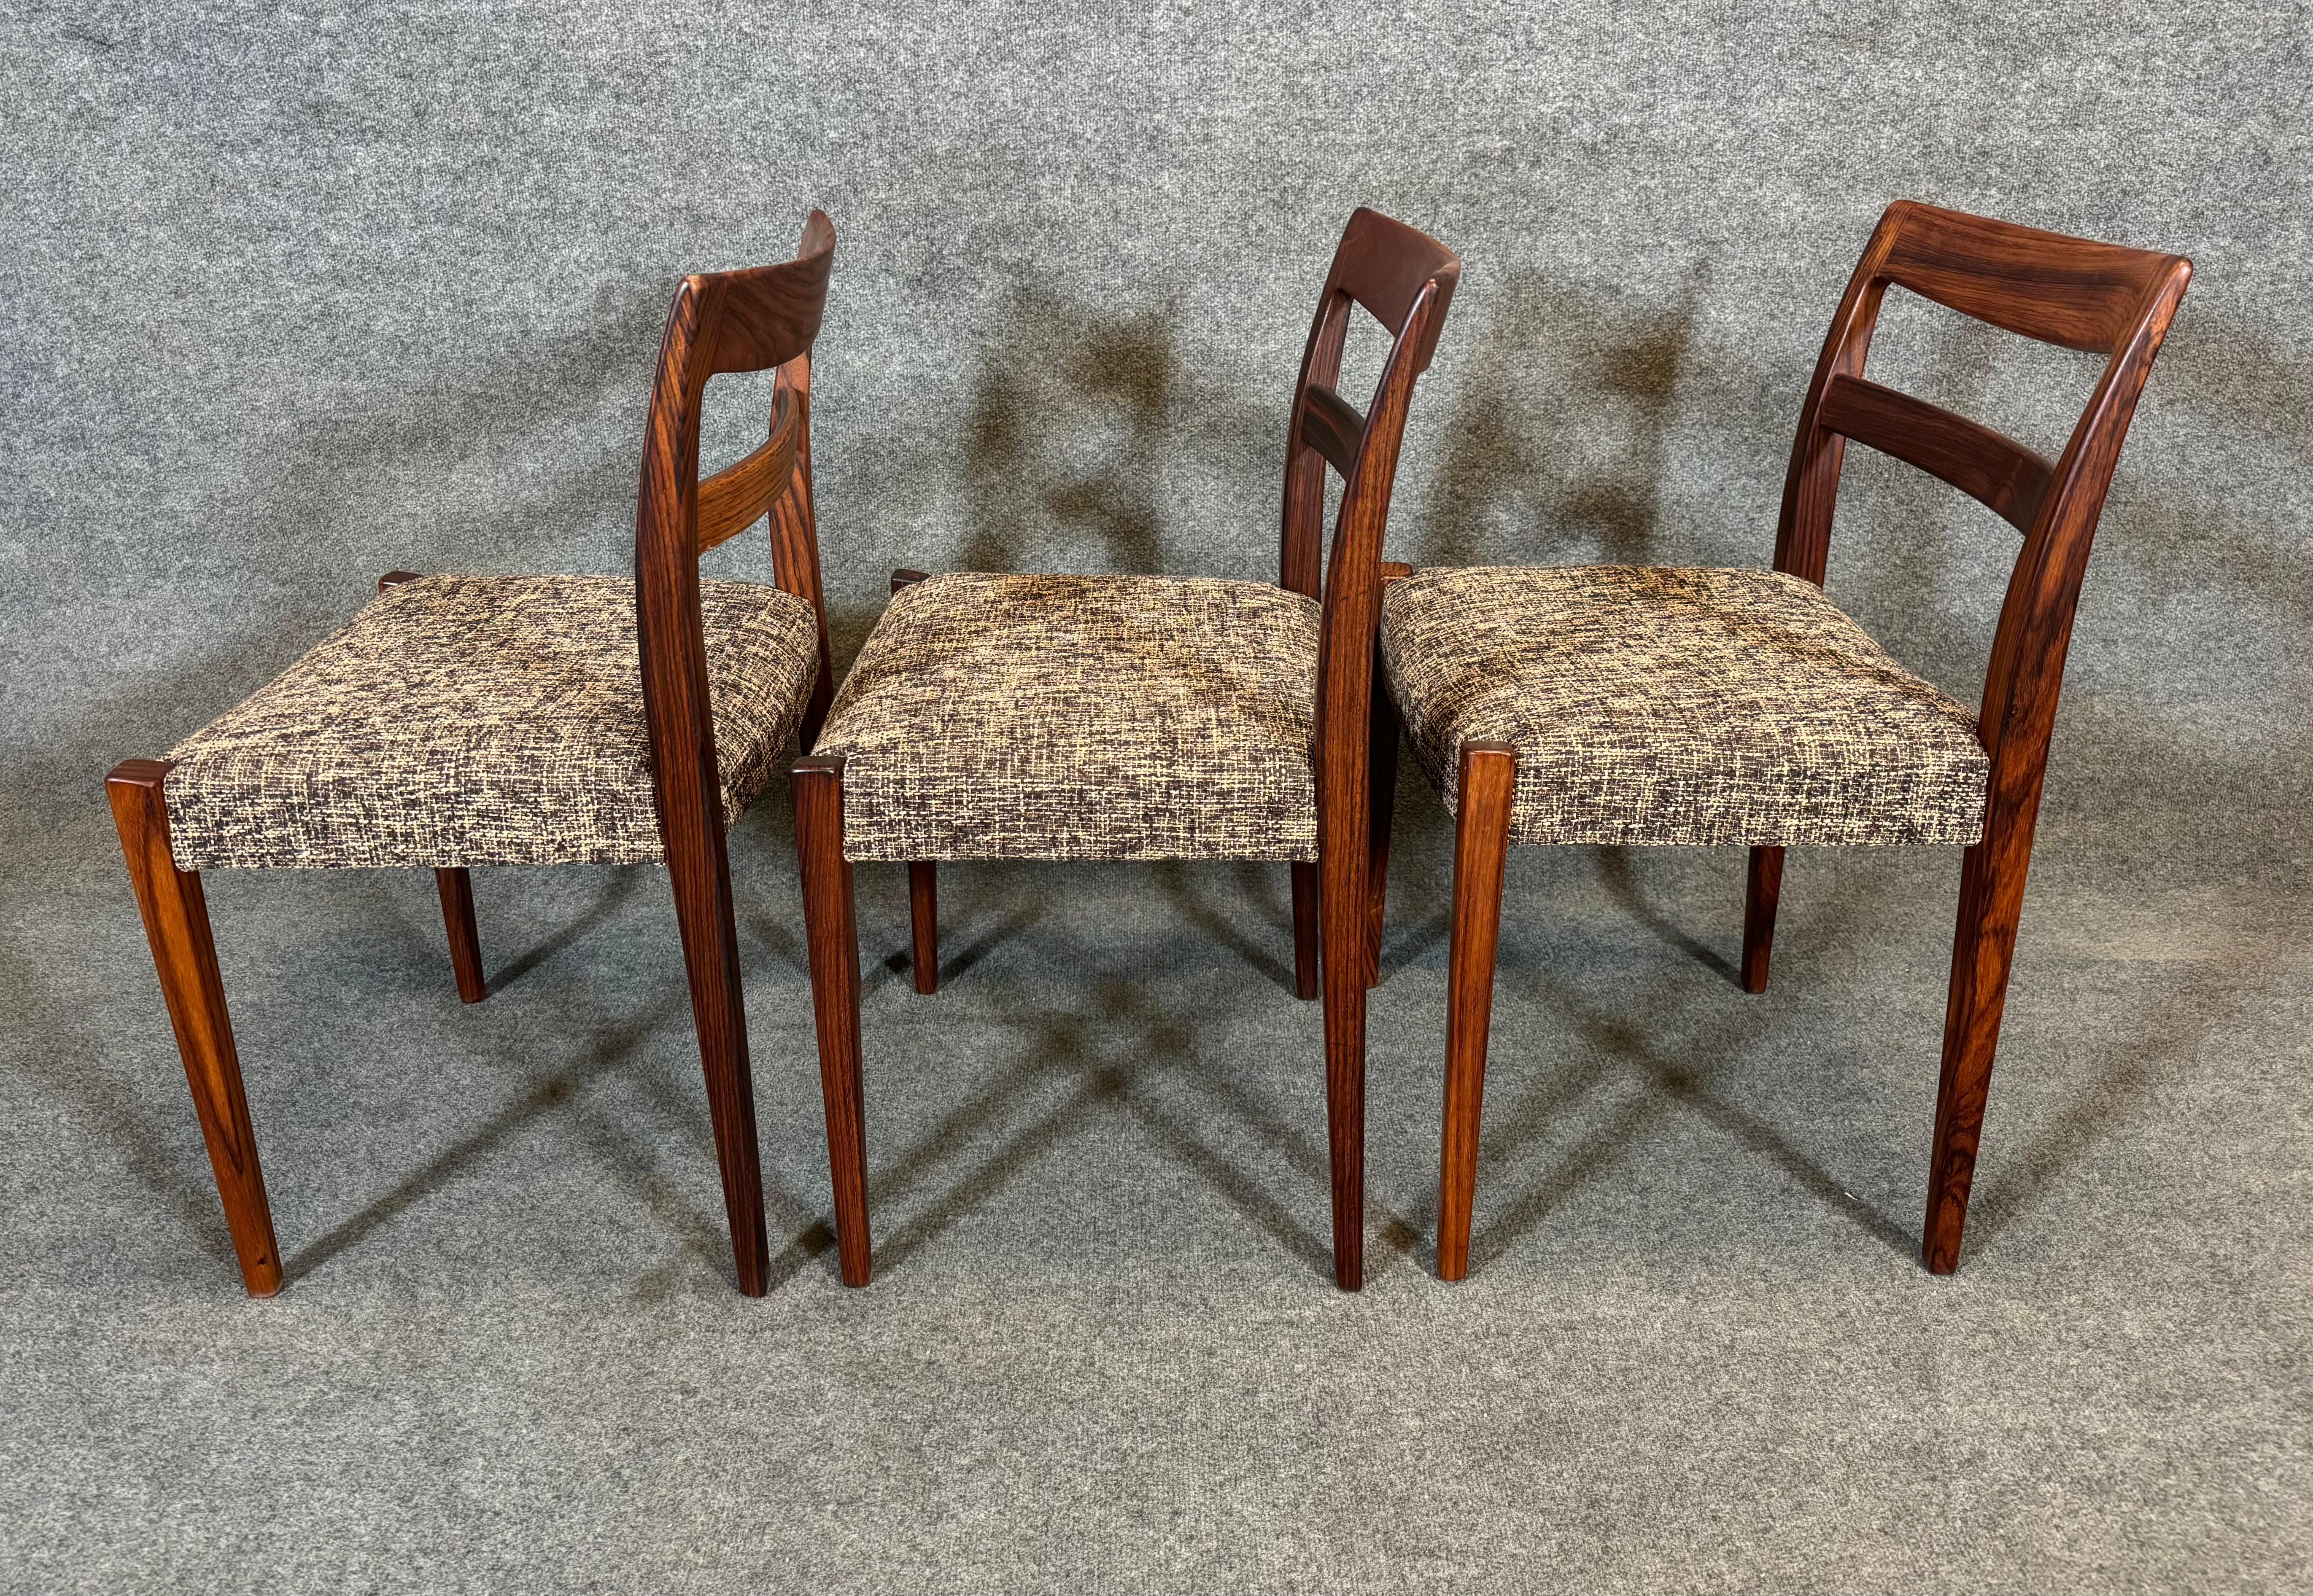  8 Vintage Danish Mid Century Rosewood Dining Chairs 